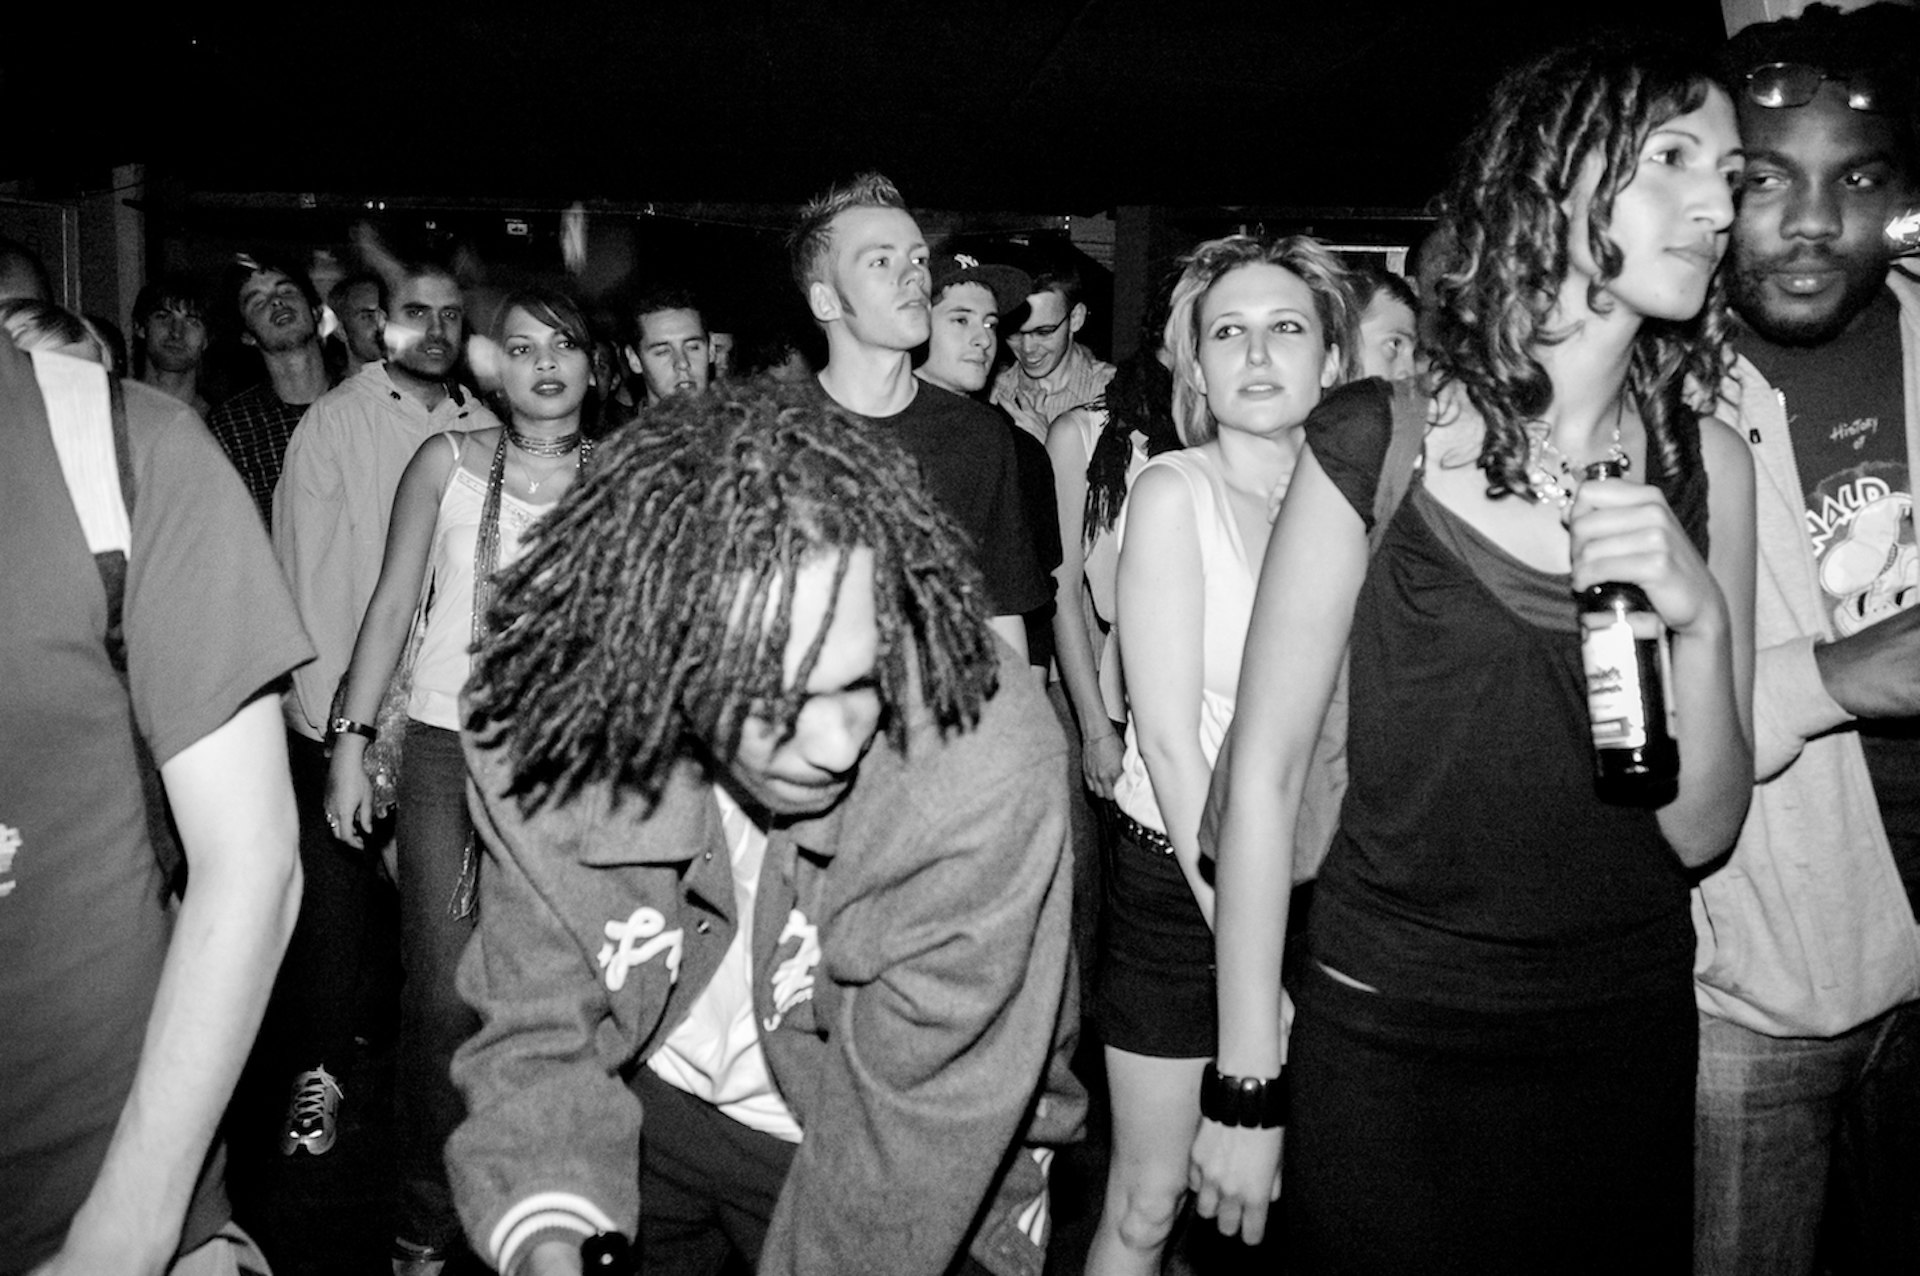 Photos capturing the rise of South London‘s dubstep scene